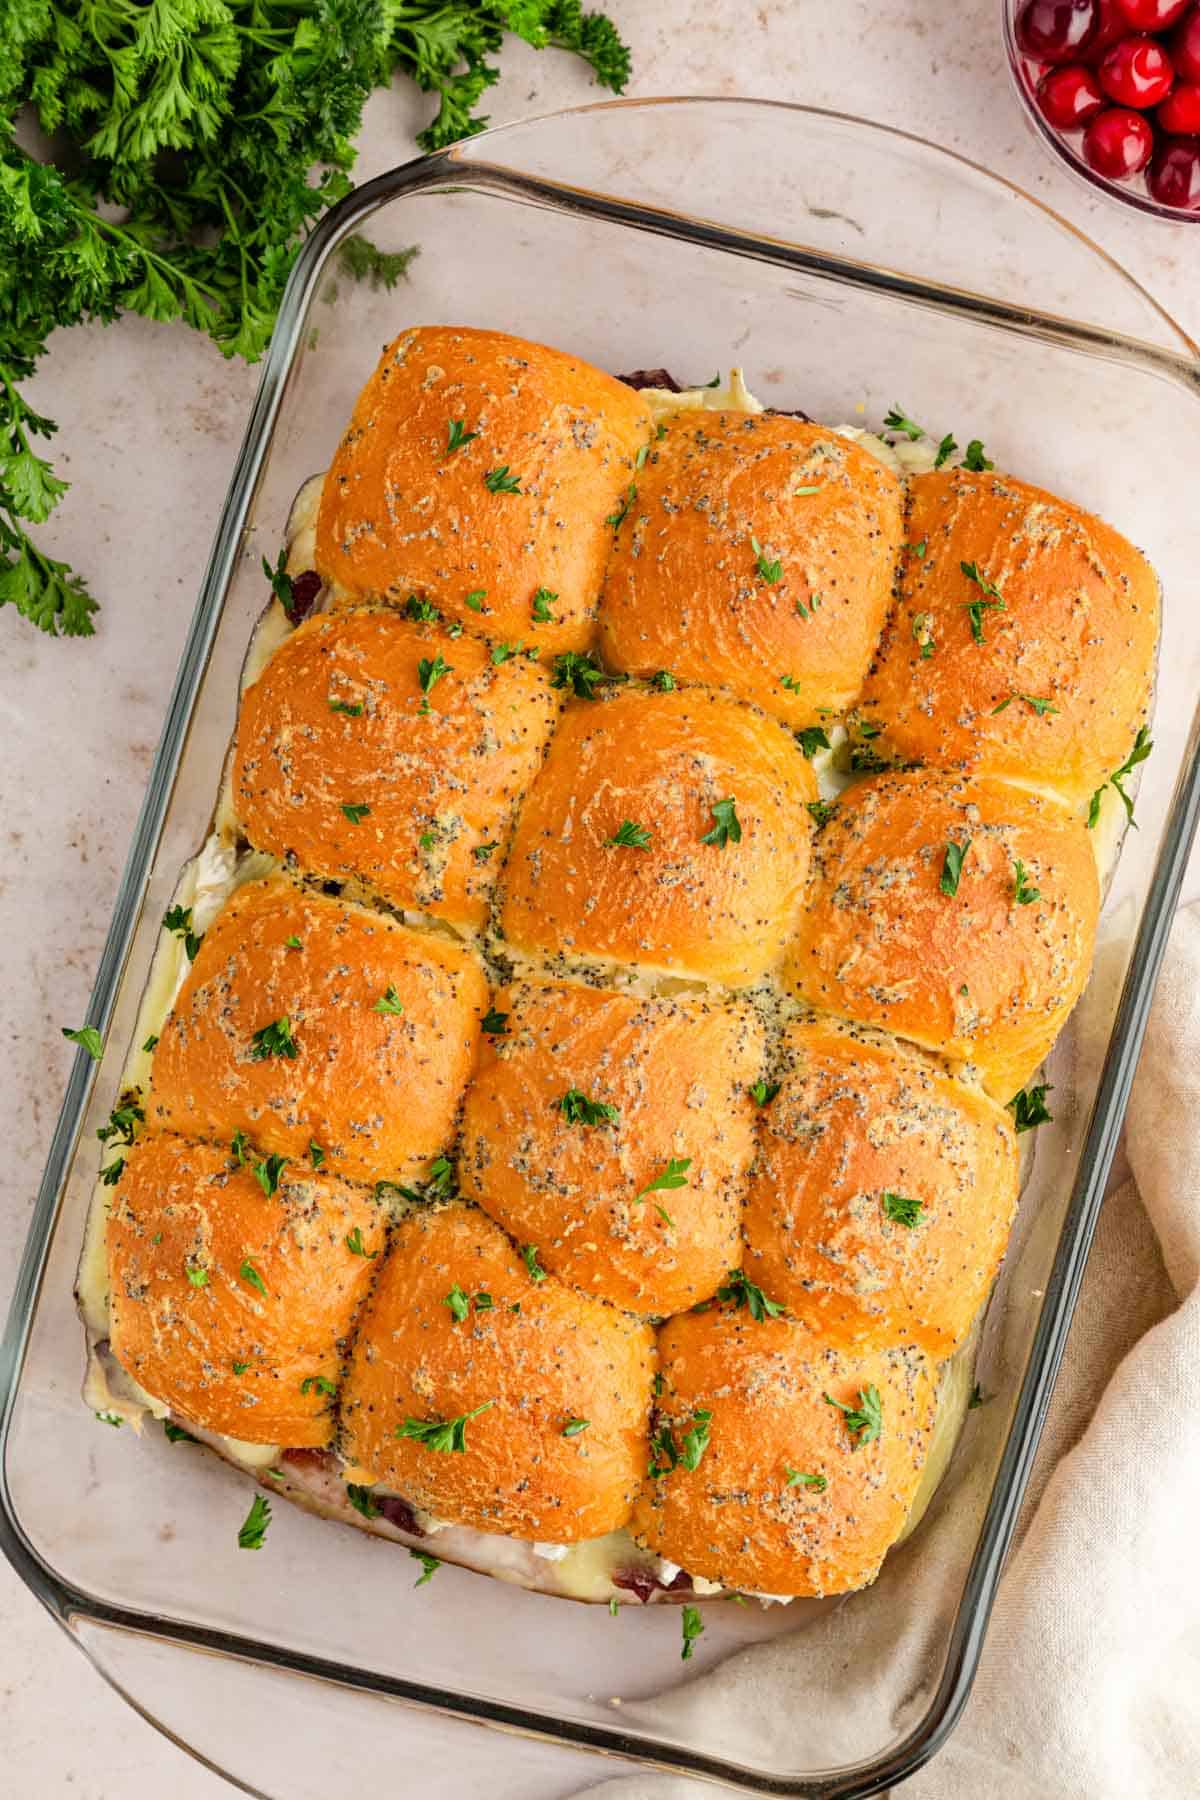 Overhead image of a glass baking dish filled with slider sandwiches and garnished with buttery poppy seed topping and parsley.